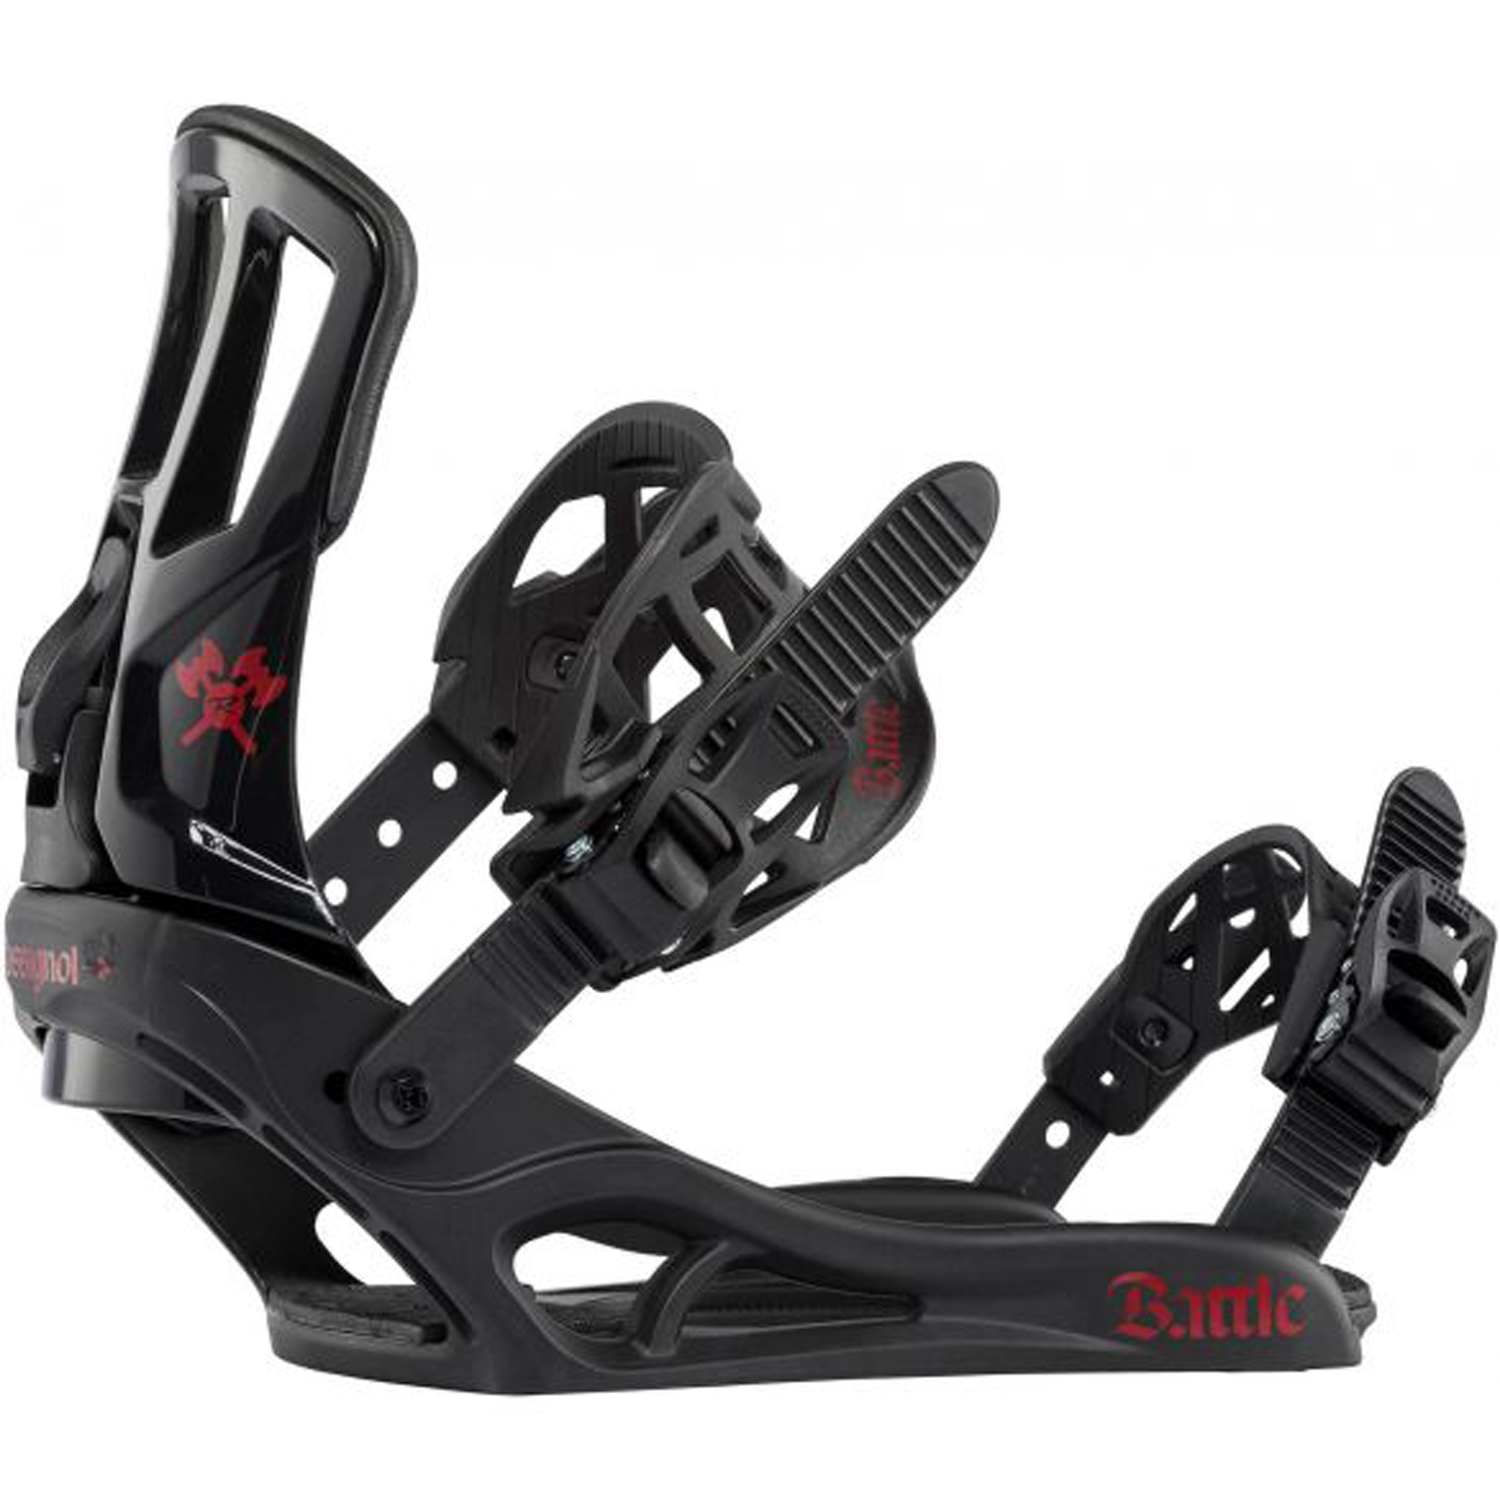 The Rossignol Battle snowboard binding in black and red